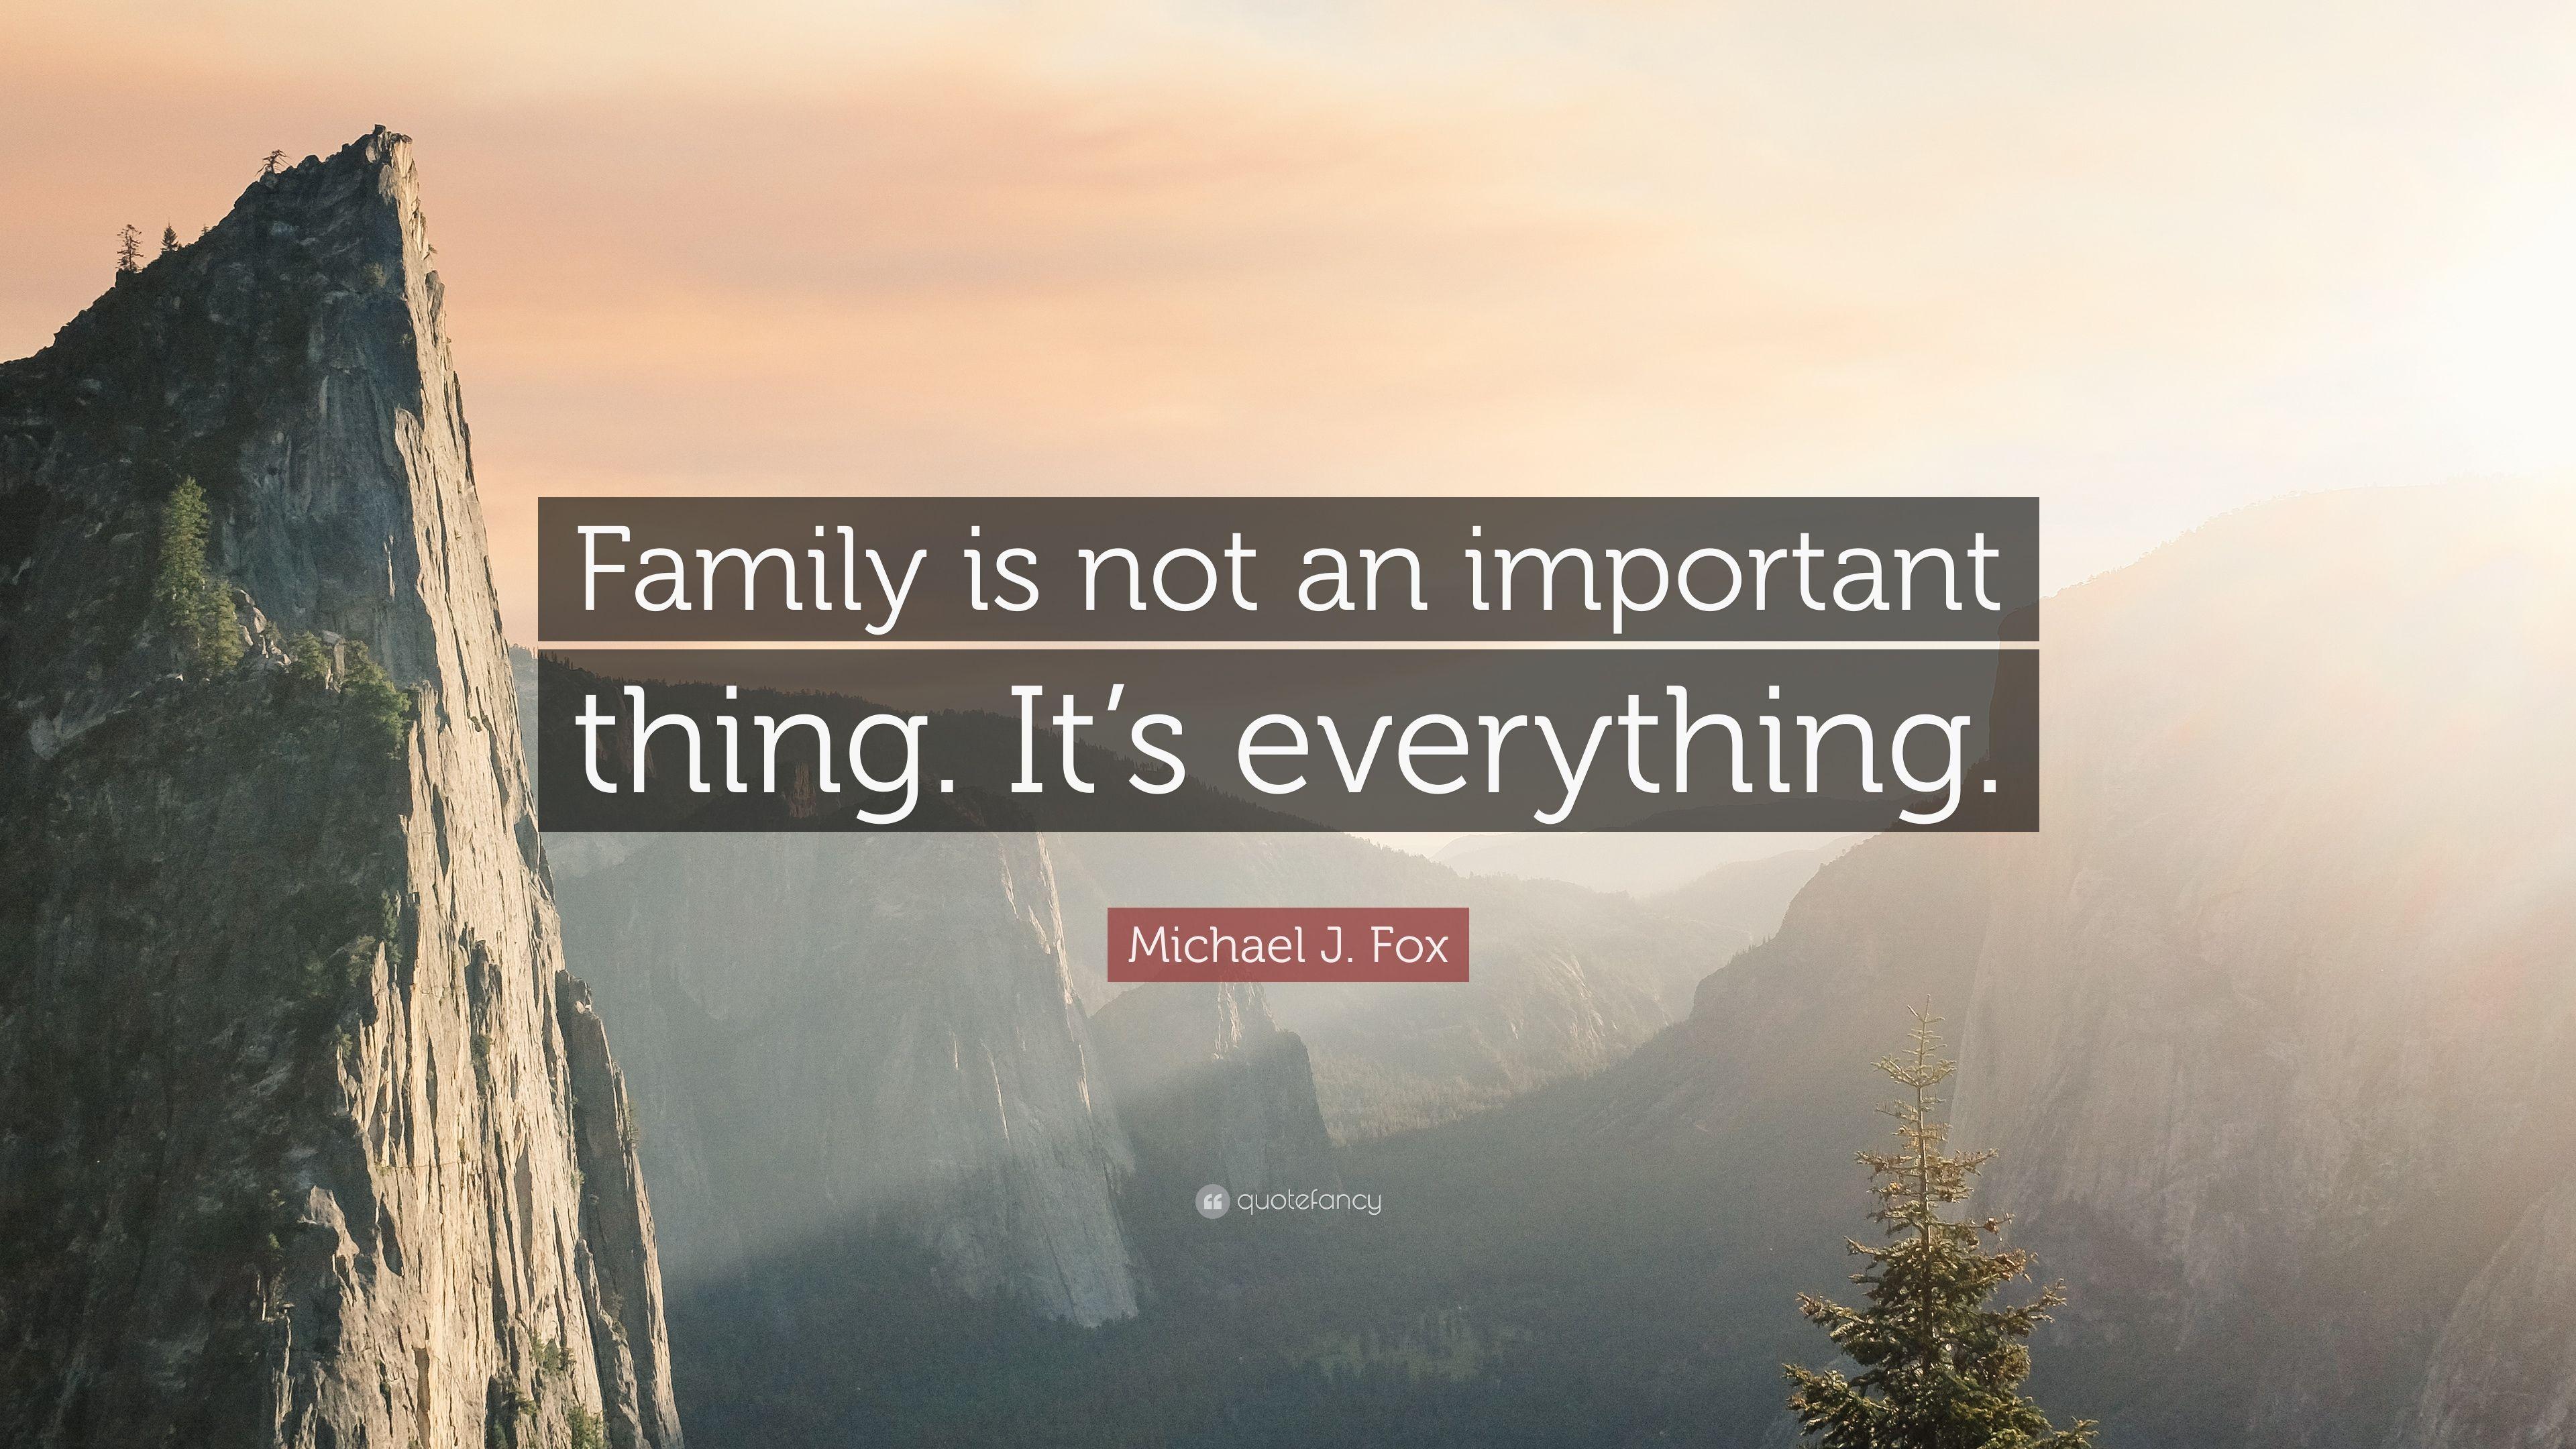 Michael J. Fox Quote: “Family is not an important thing. It's